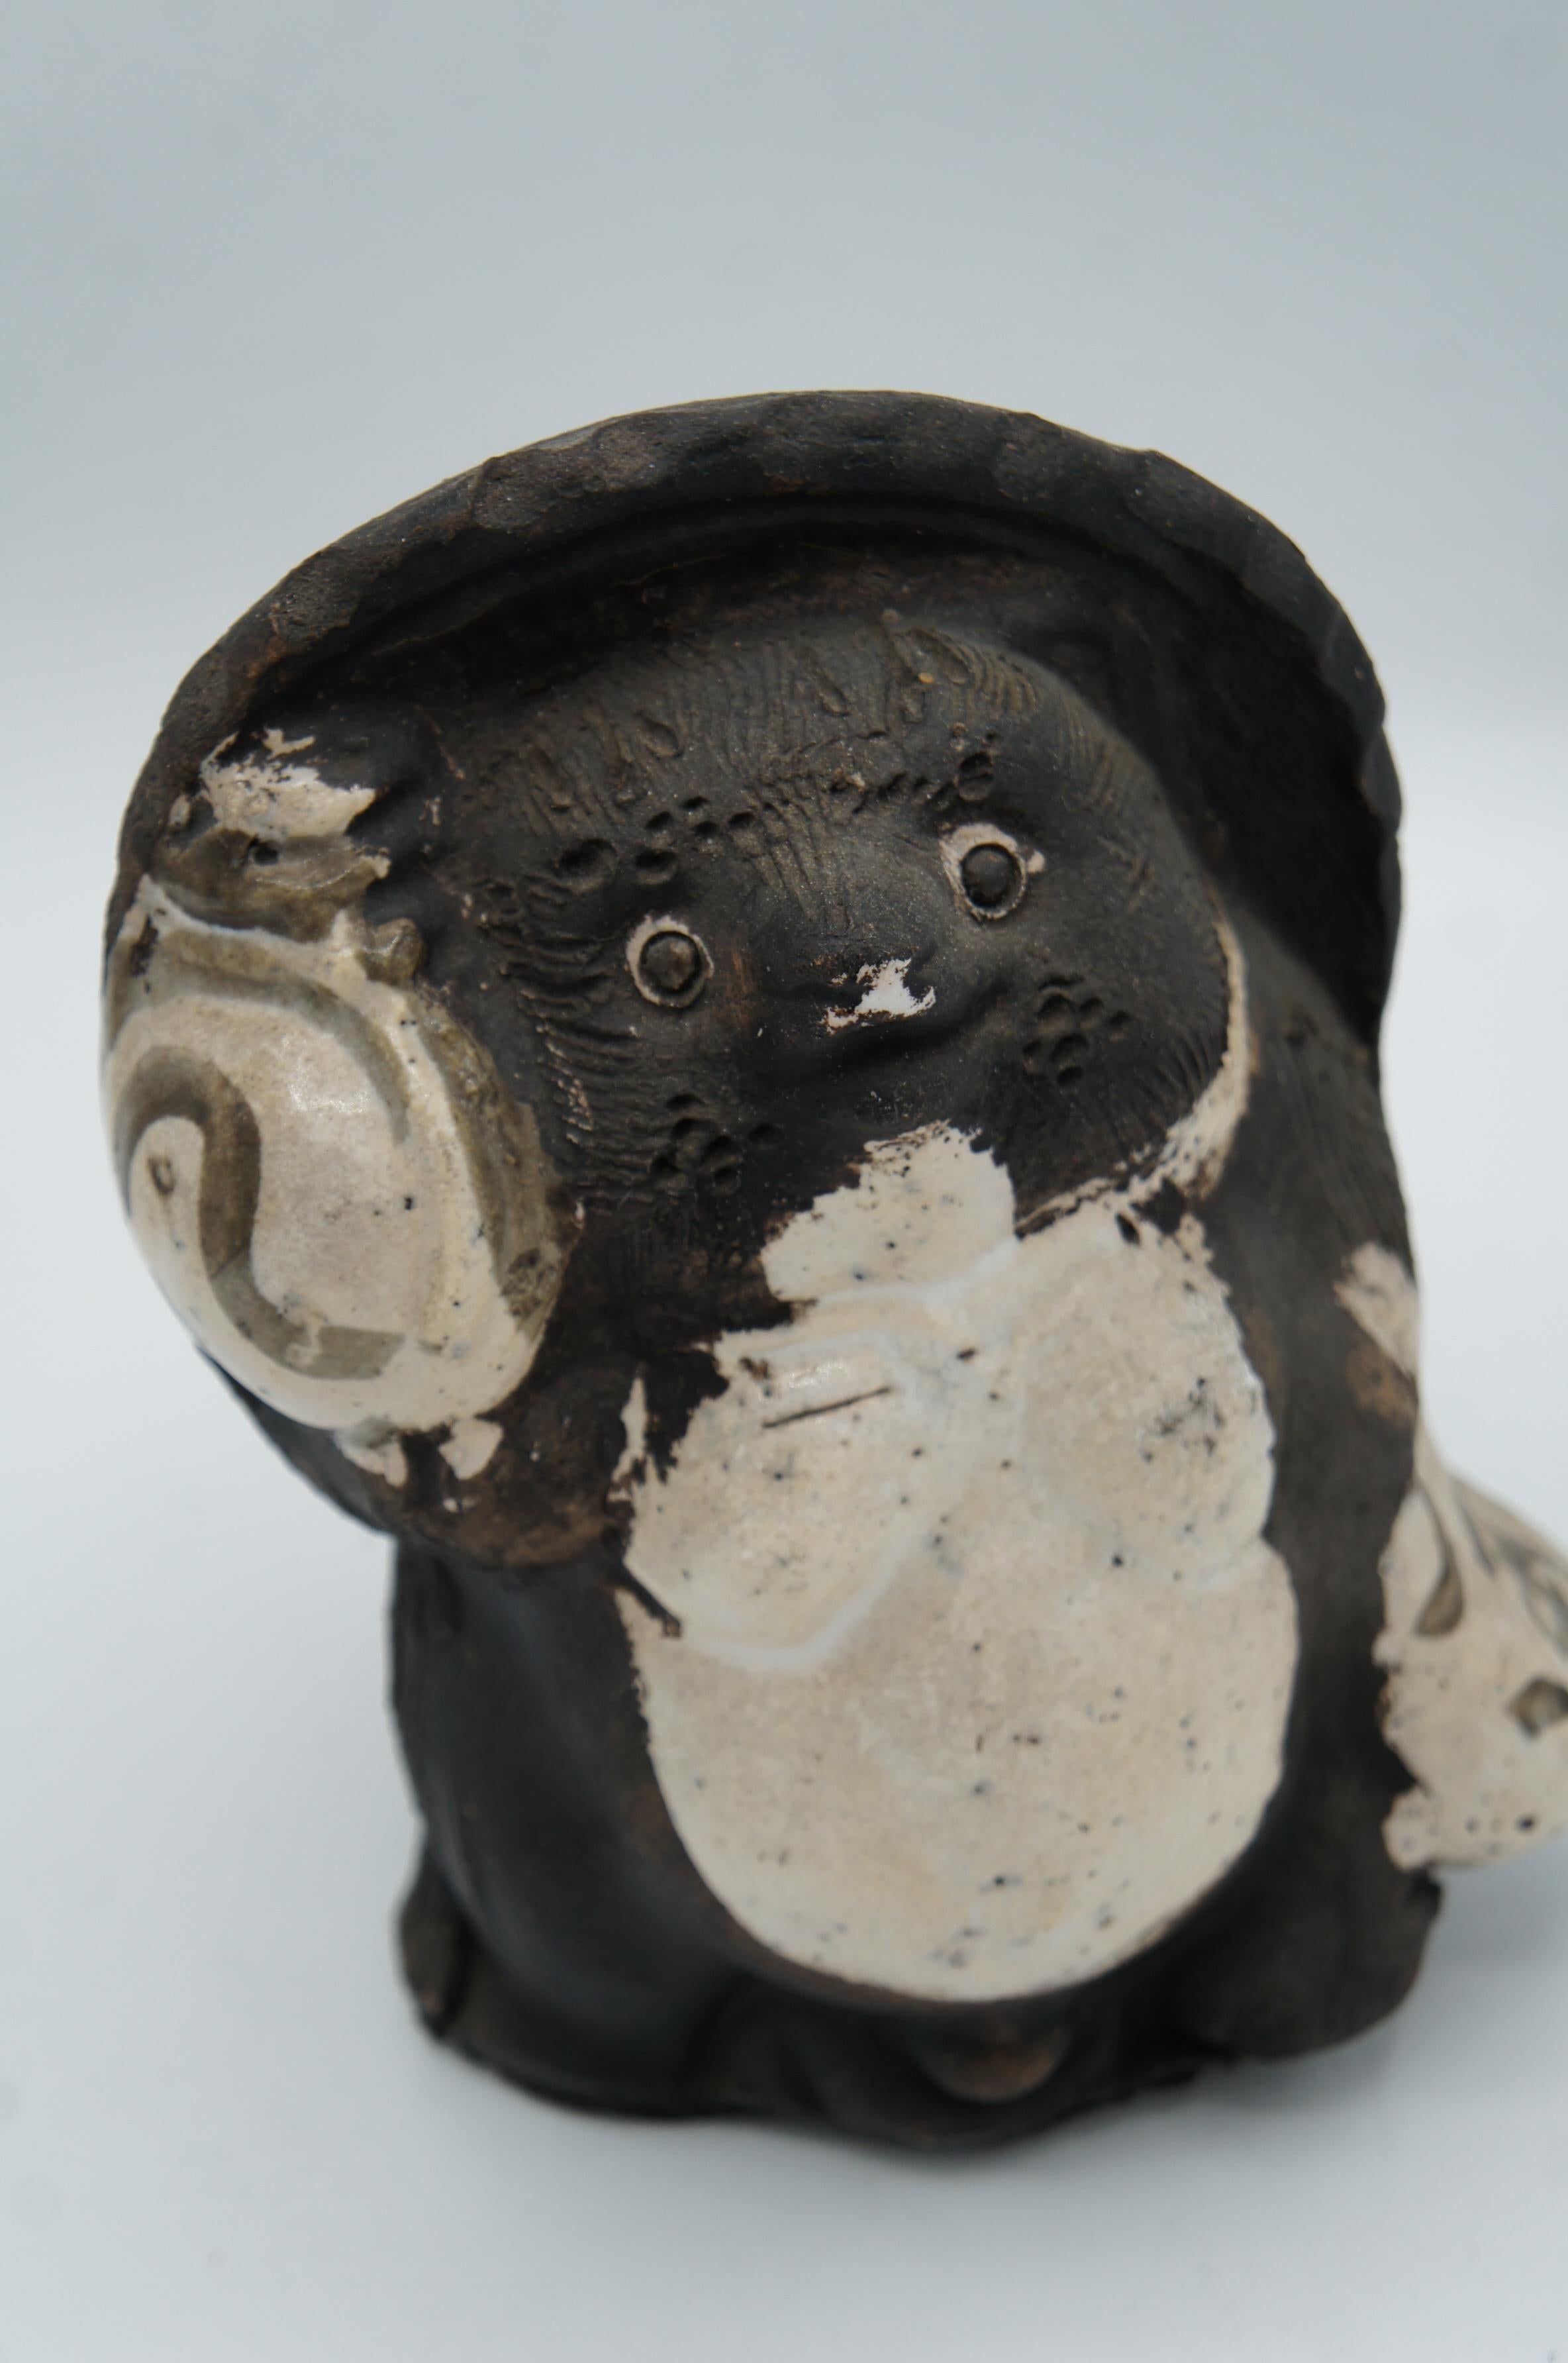 This is an object called 'Shigaraki Tanuki' which was made around 1960s.
It was made in a town called Shigaraki in Shiga prefecture in Japan.
It is made with porcelain. Tanuki is a Japanese racoon and it has 8 fortunes meanings.

1)The Hat: The